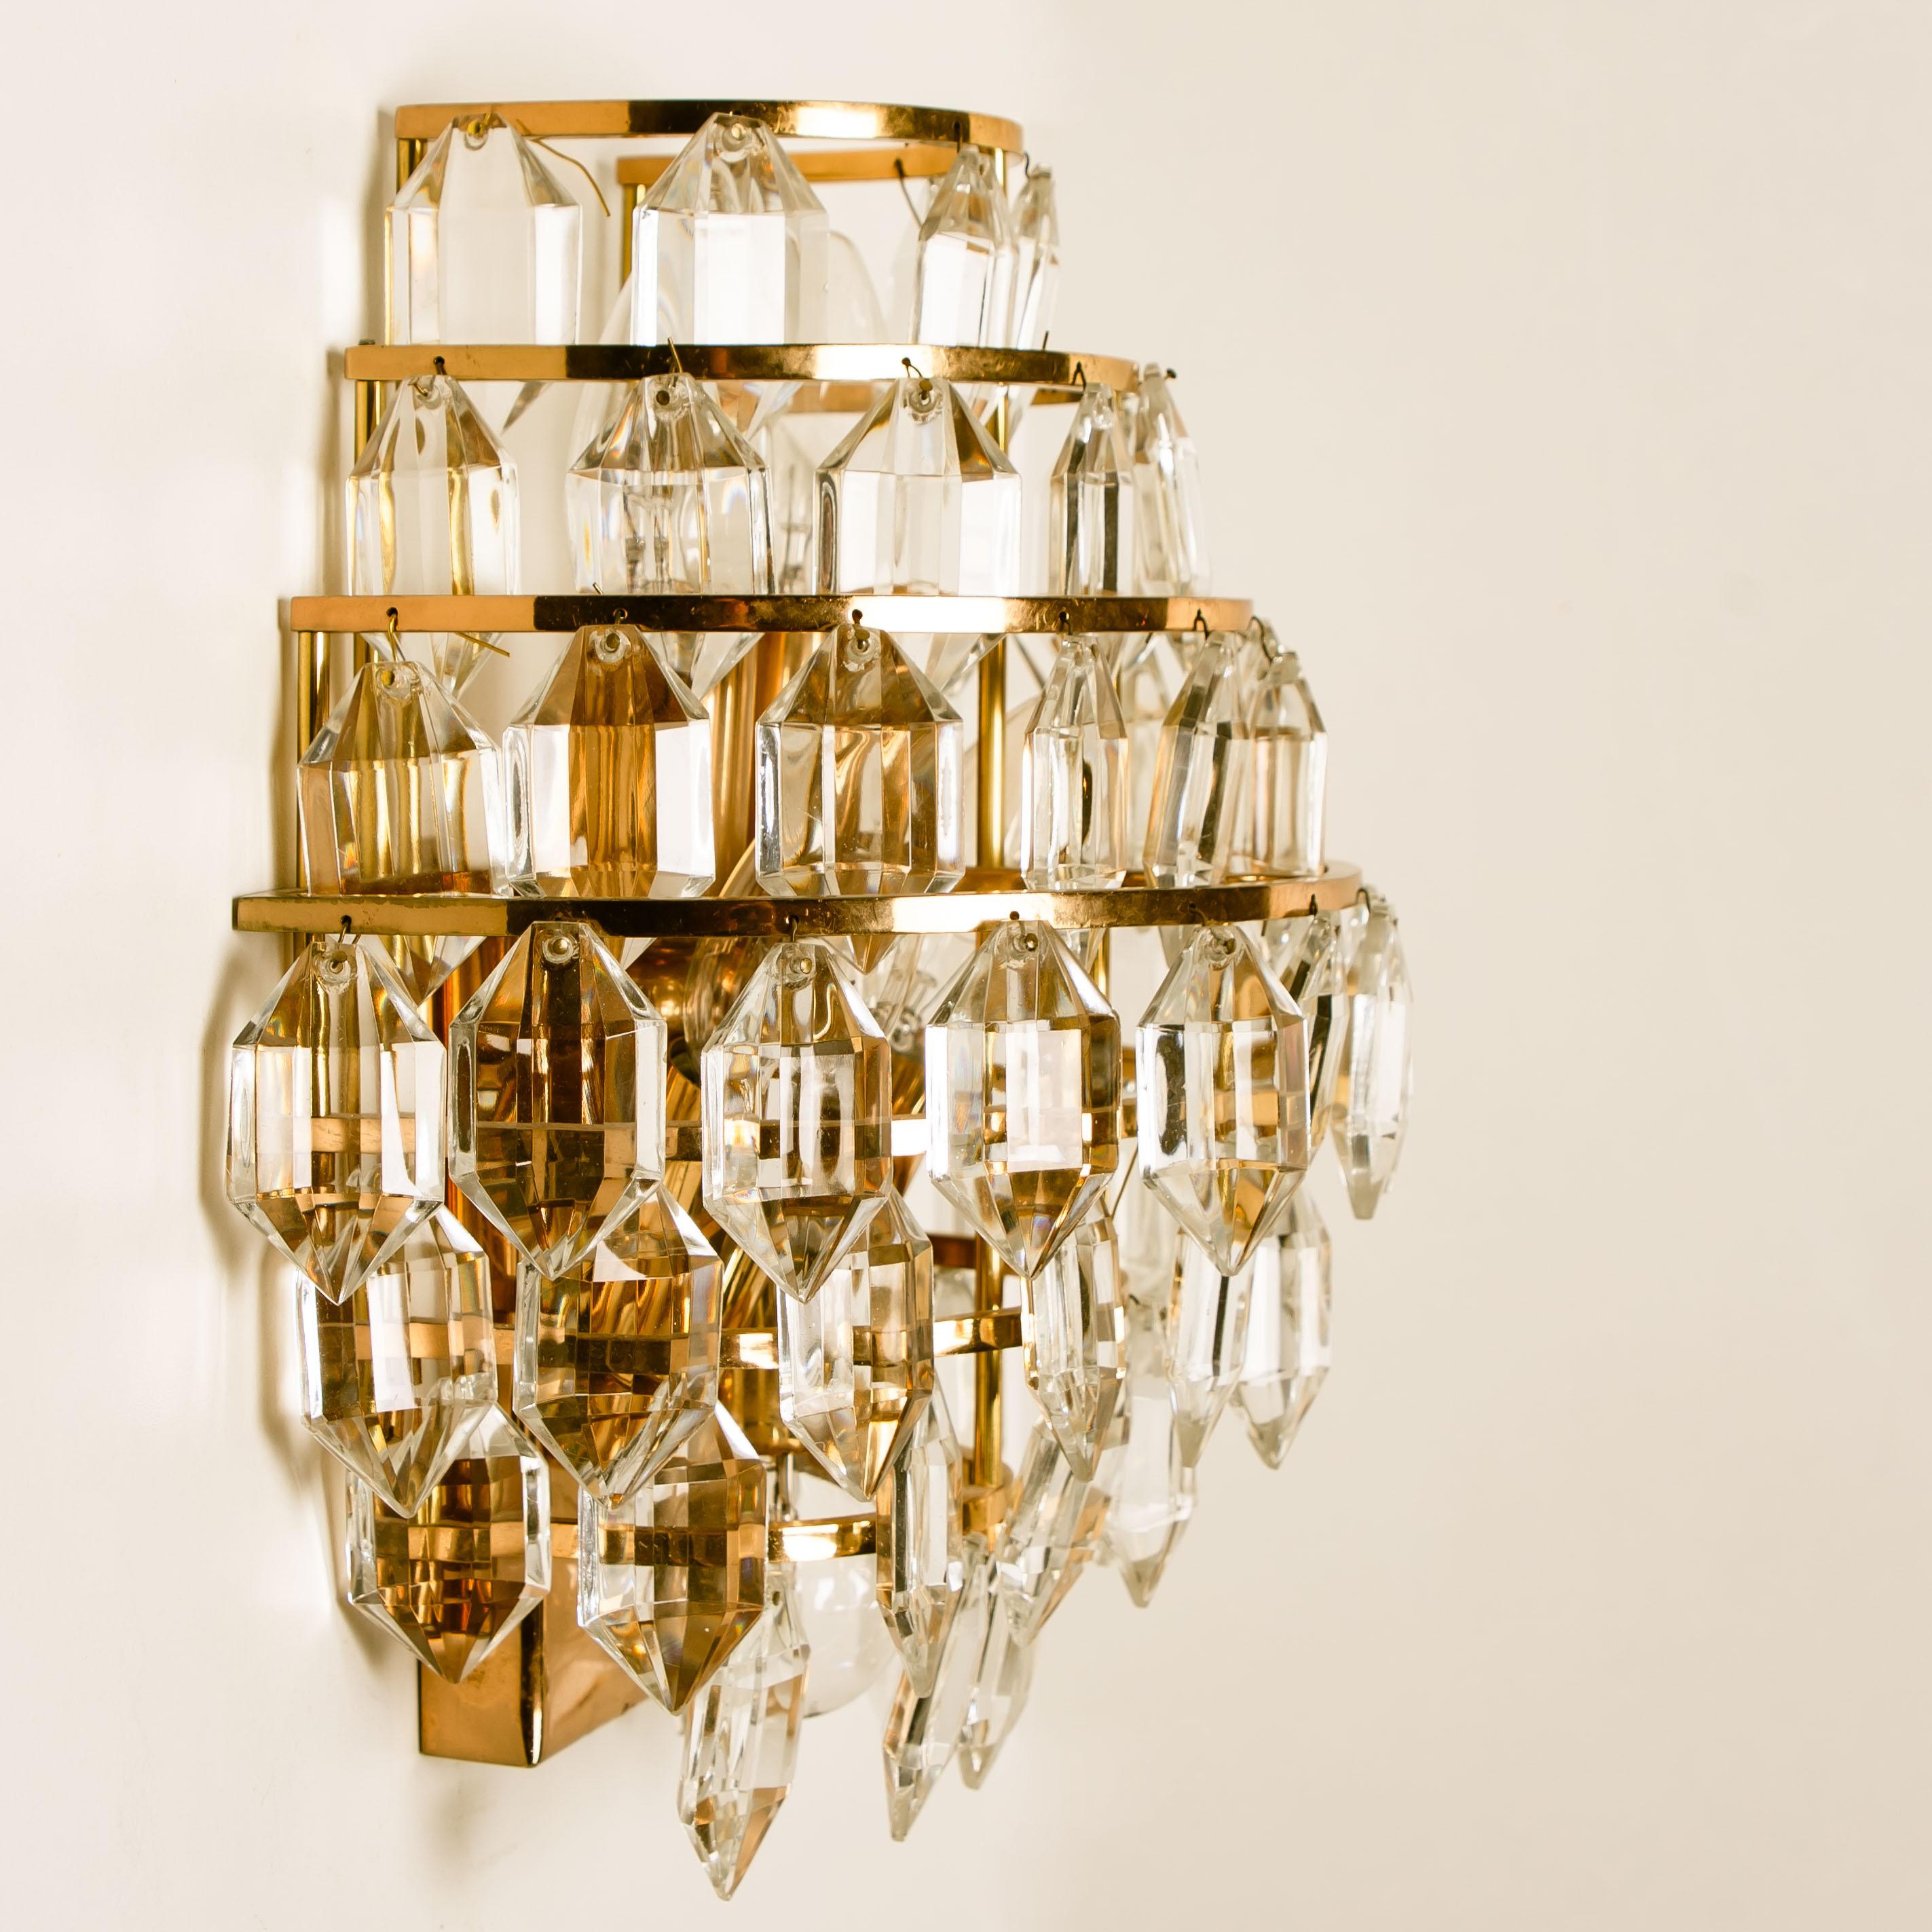 One of the Four Modern Crystal Glass Wall Sconces by Bakalowits, 1960s For Sale 3